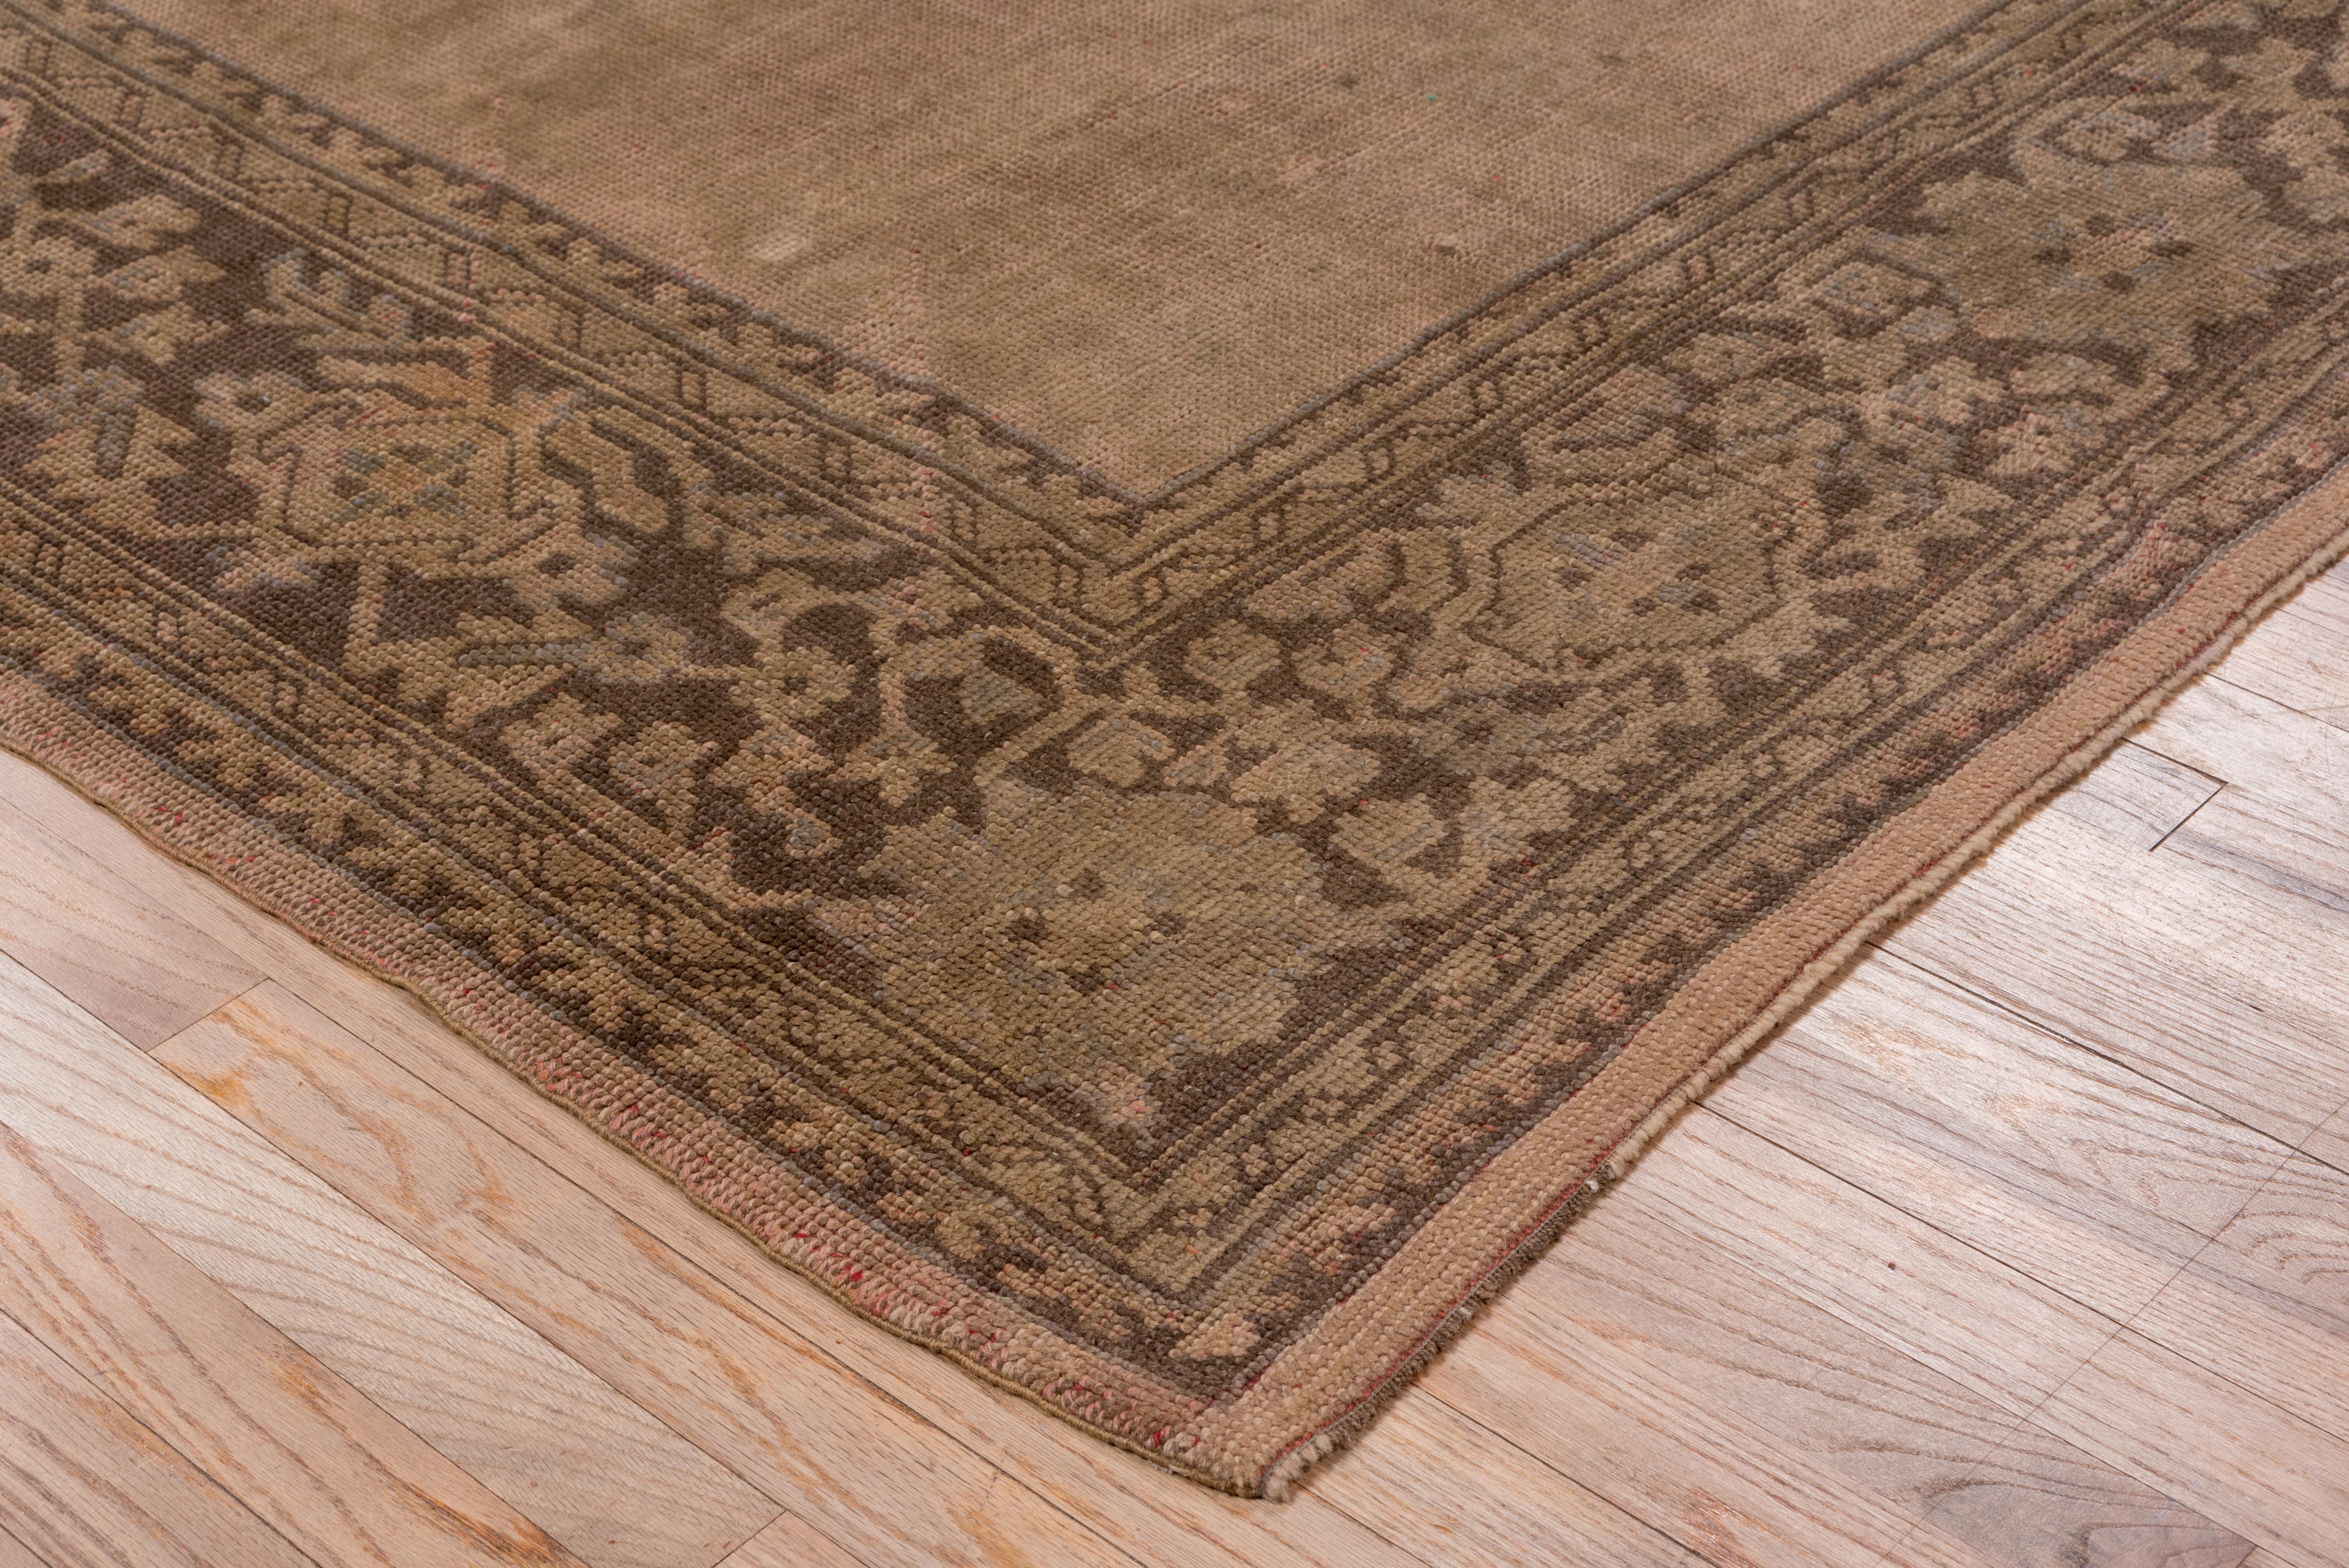 Antique Oushak Rug, Plain Field In Good Condition For Sale In New York, NY